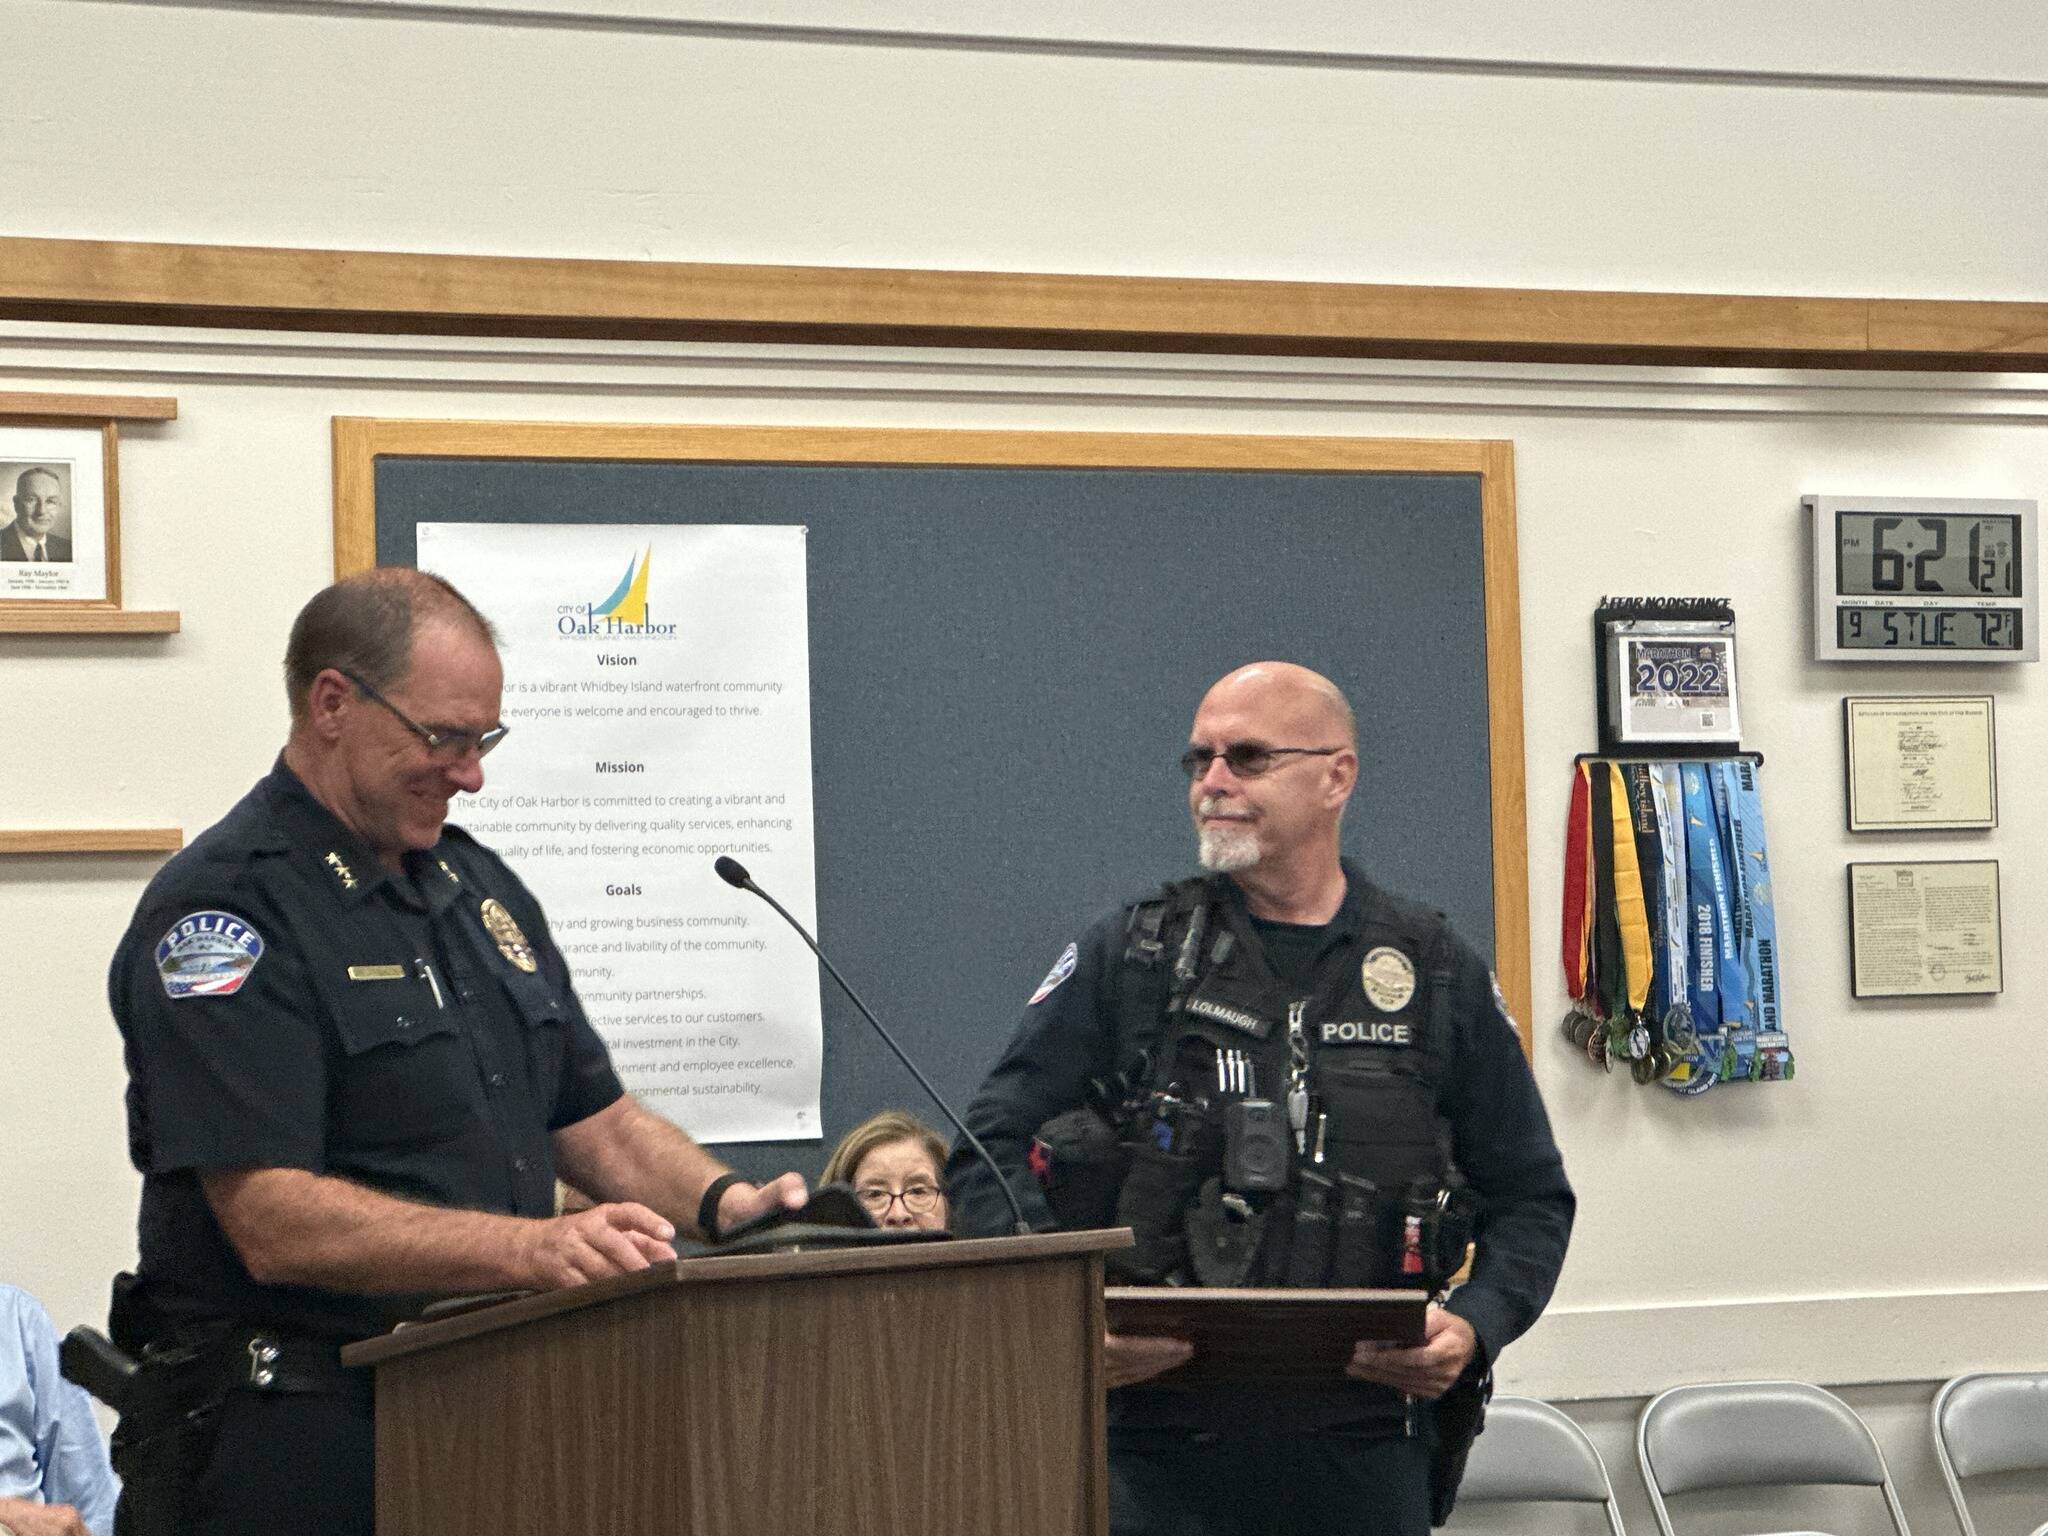 Oak Harbor Police Officer Mel Lolmaugh, right, receives the Emergency Treatment Award at a city council meeting Sept. 5. (Photo provided)